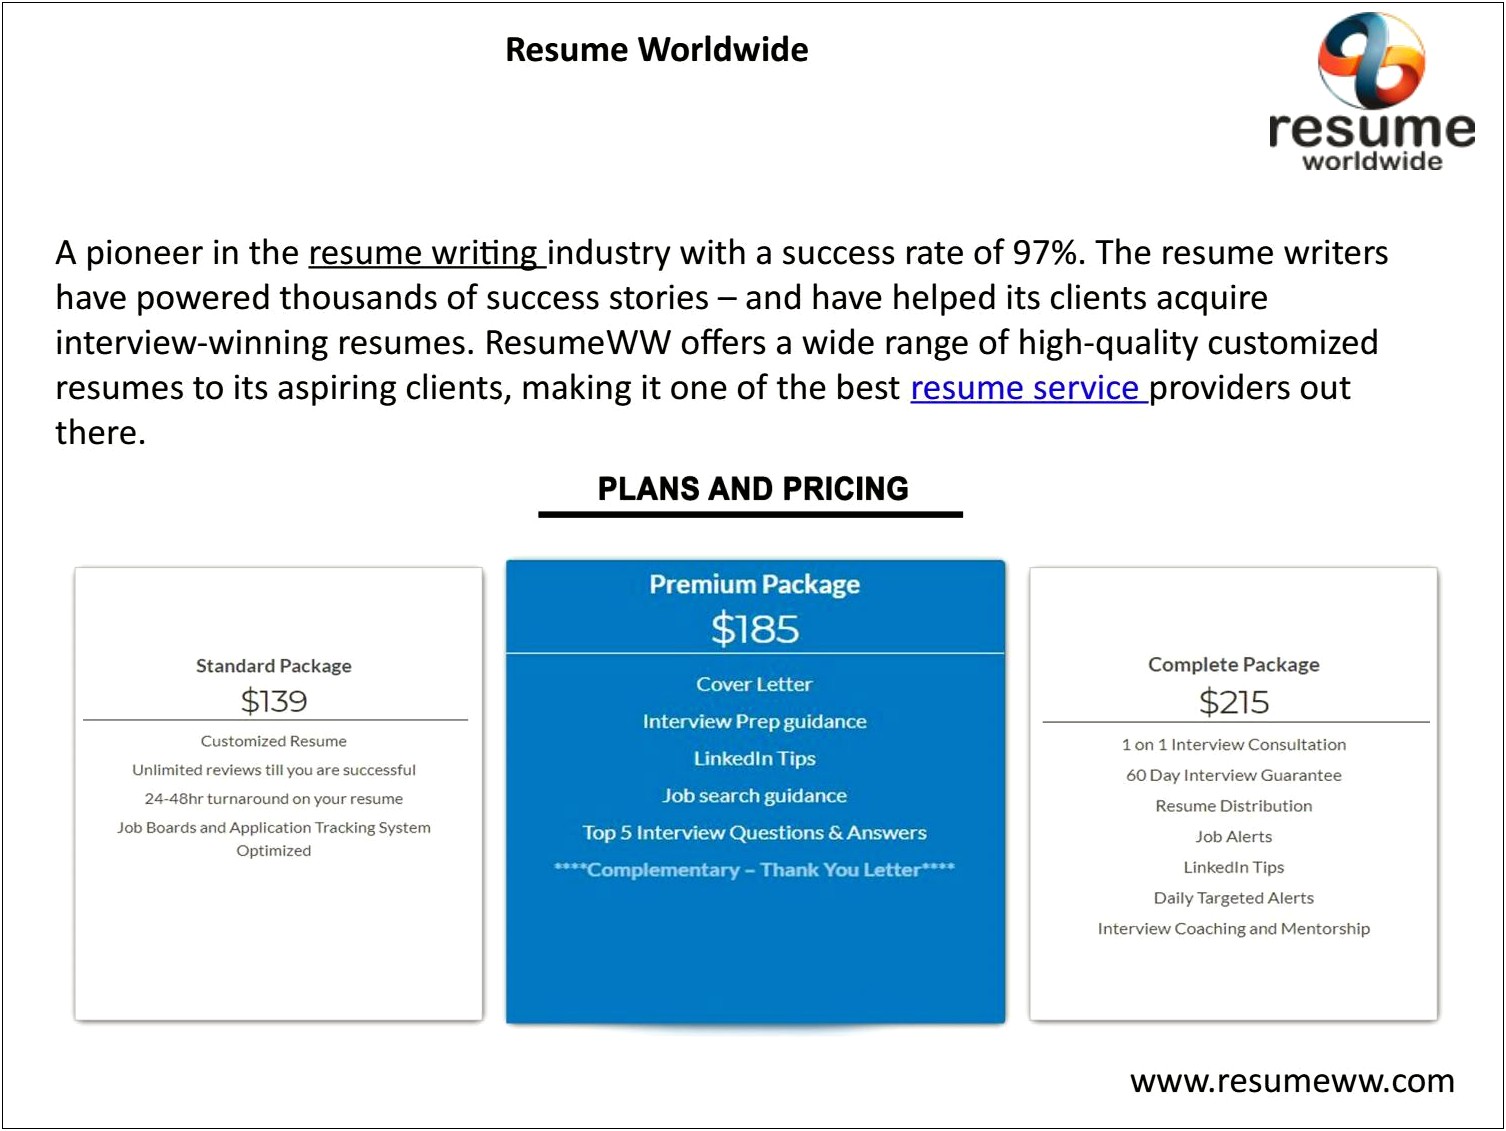 The Best Resume Distribution Service